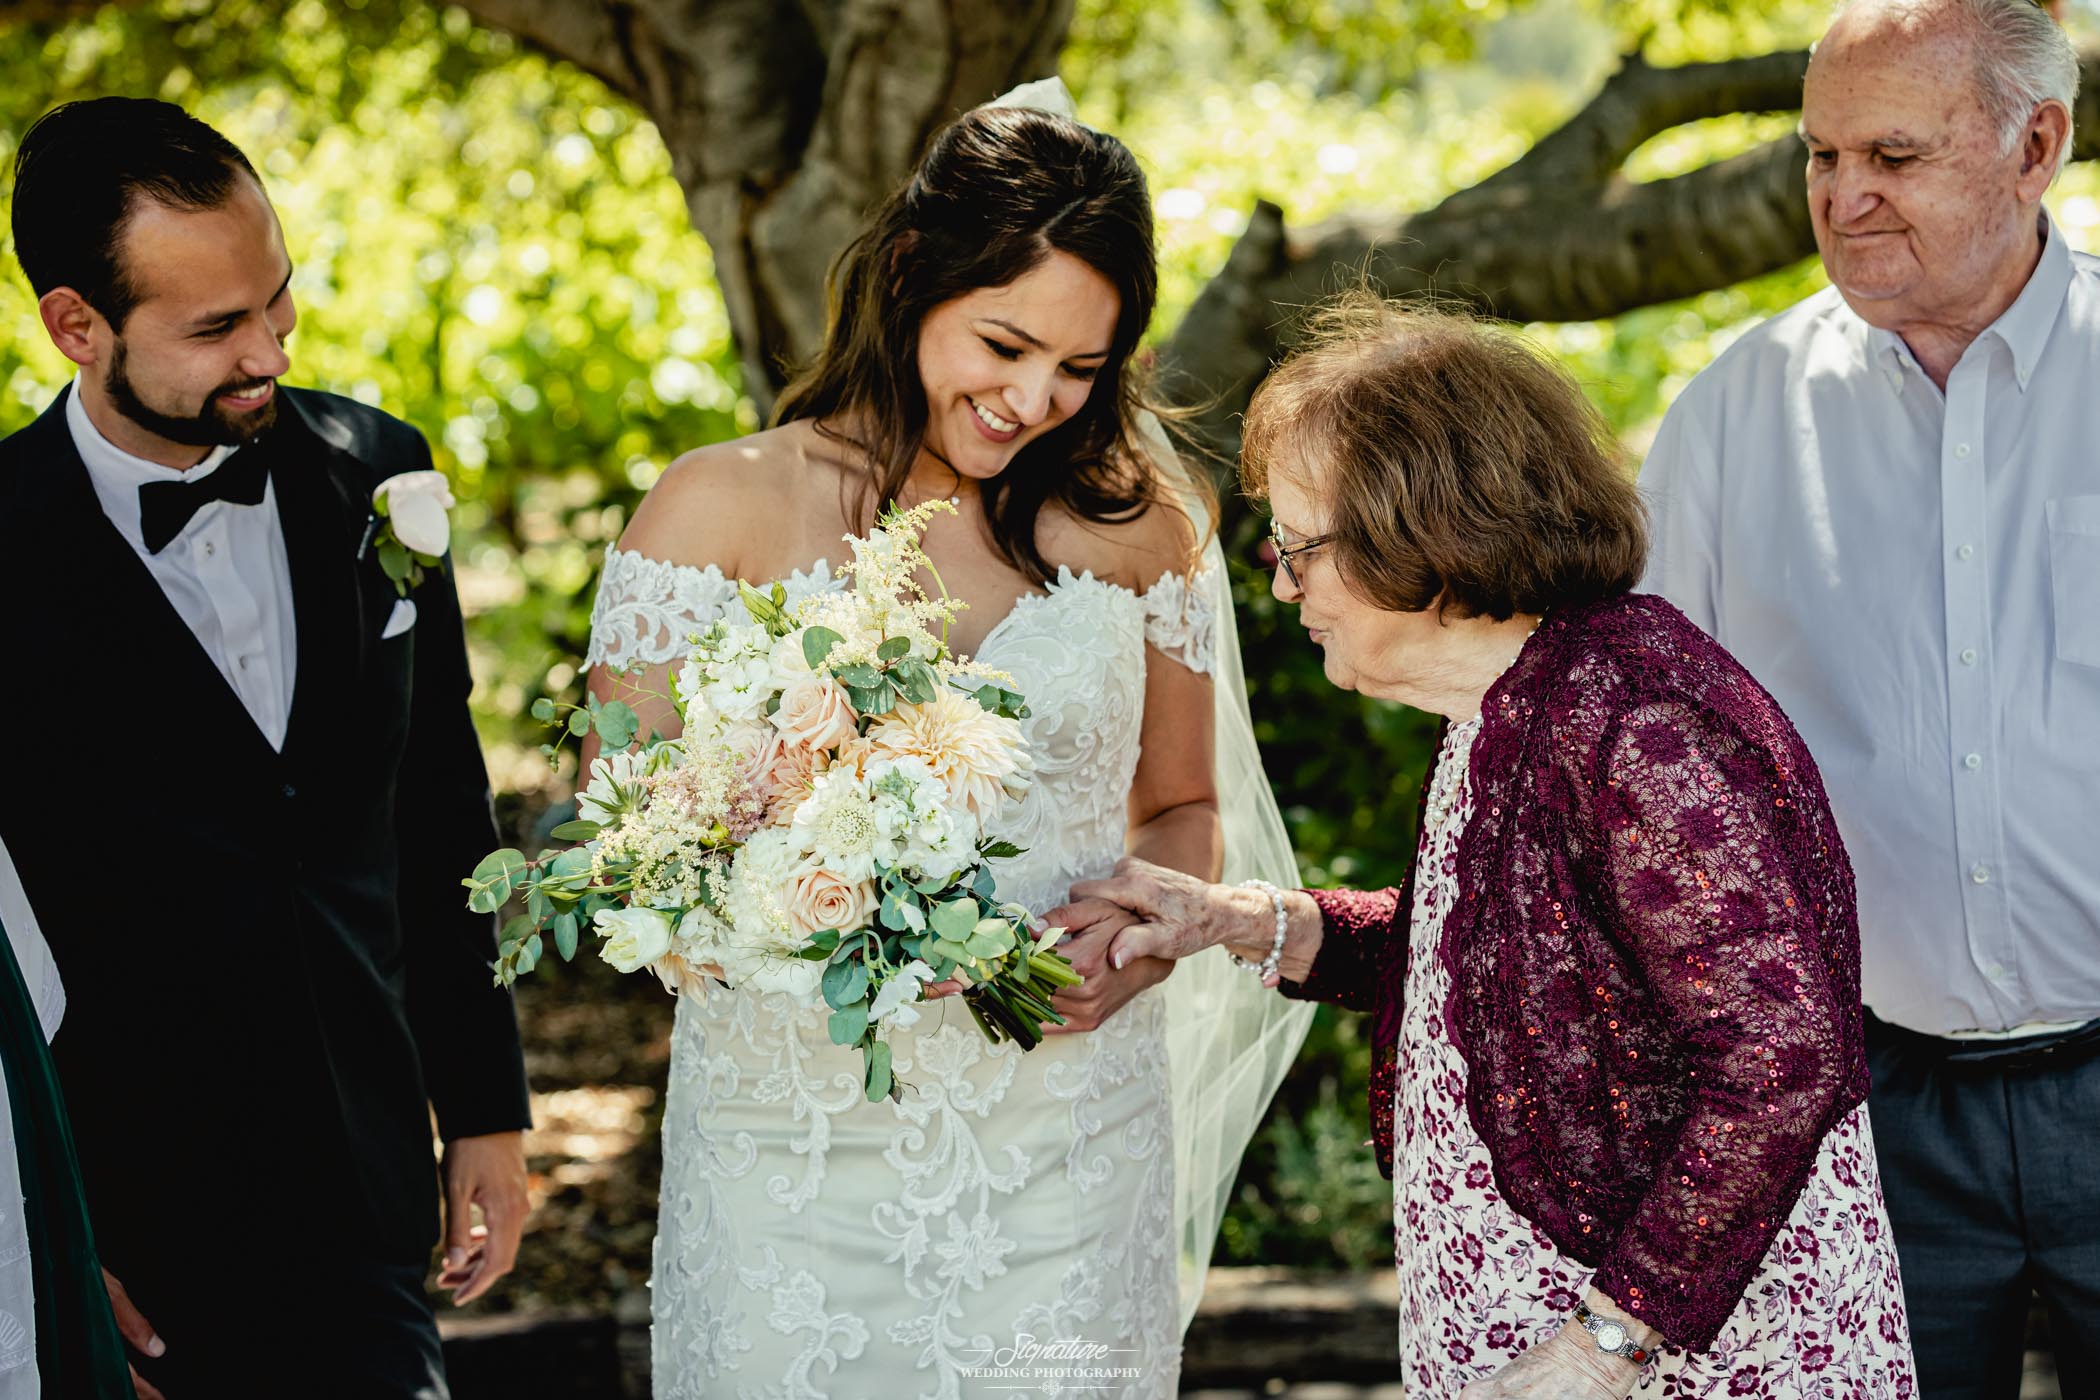 Matriarch holding brides arm outside candid